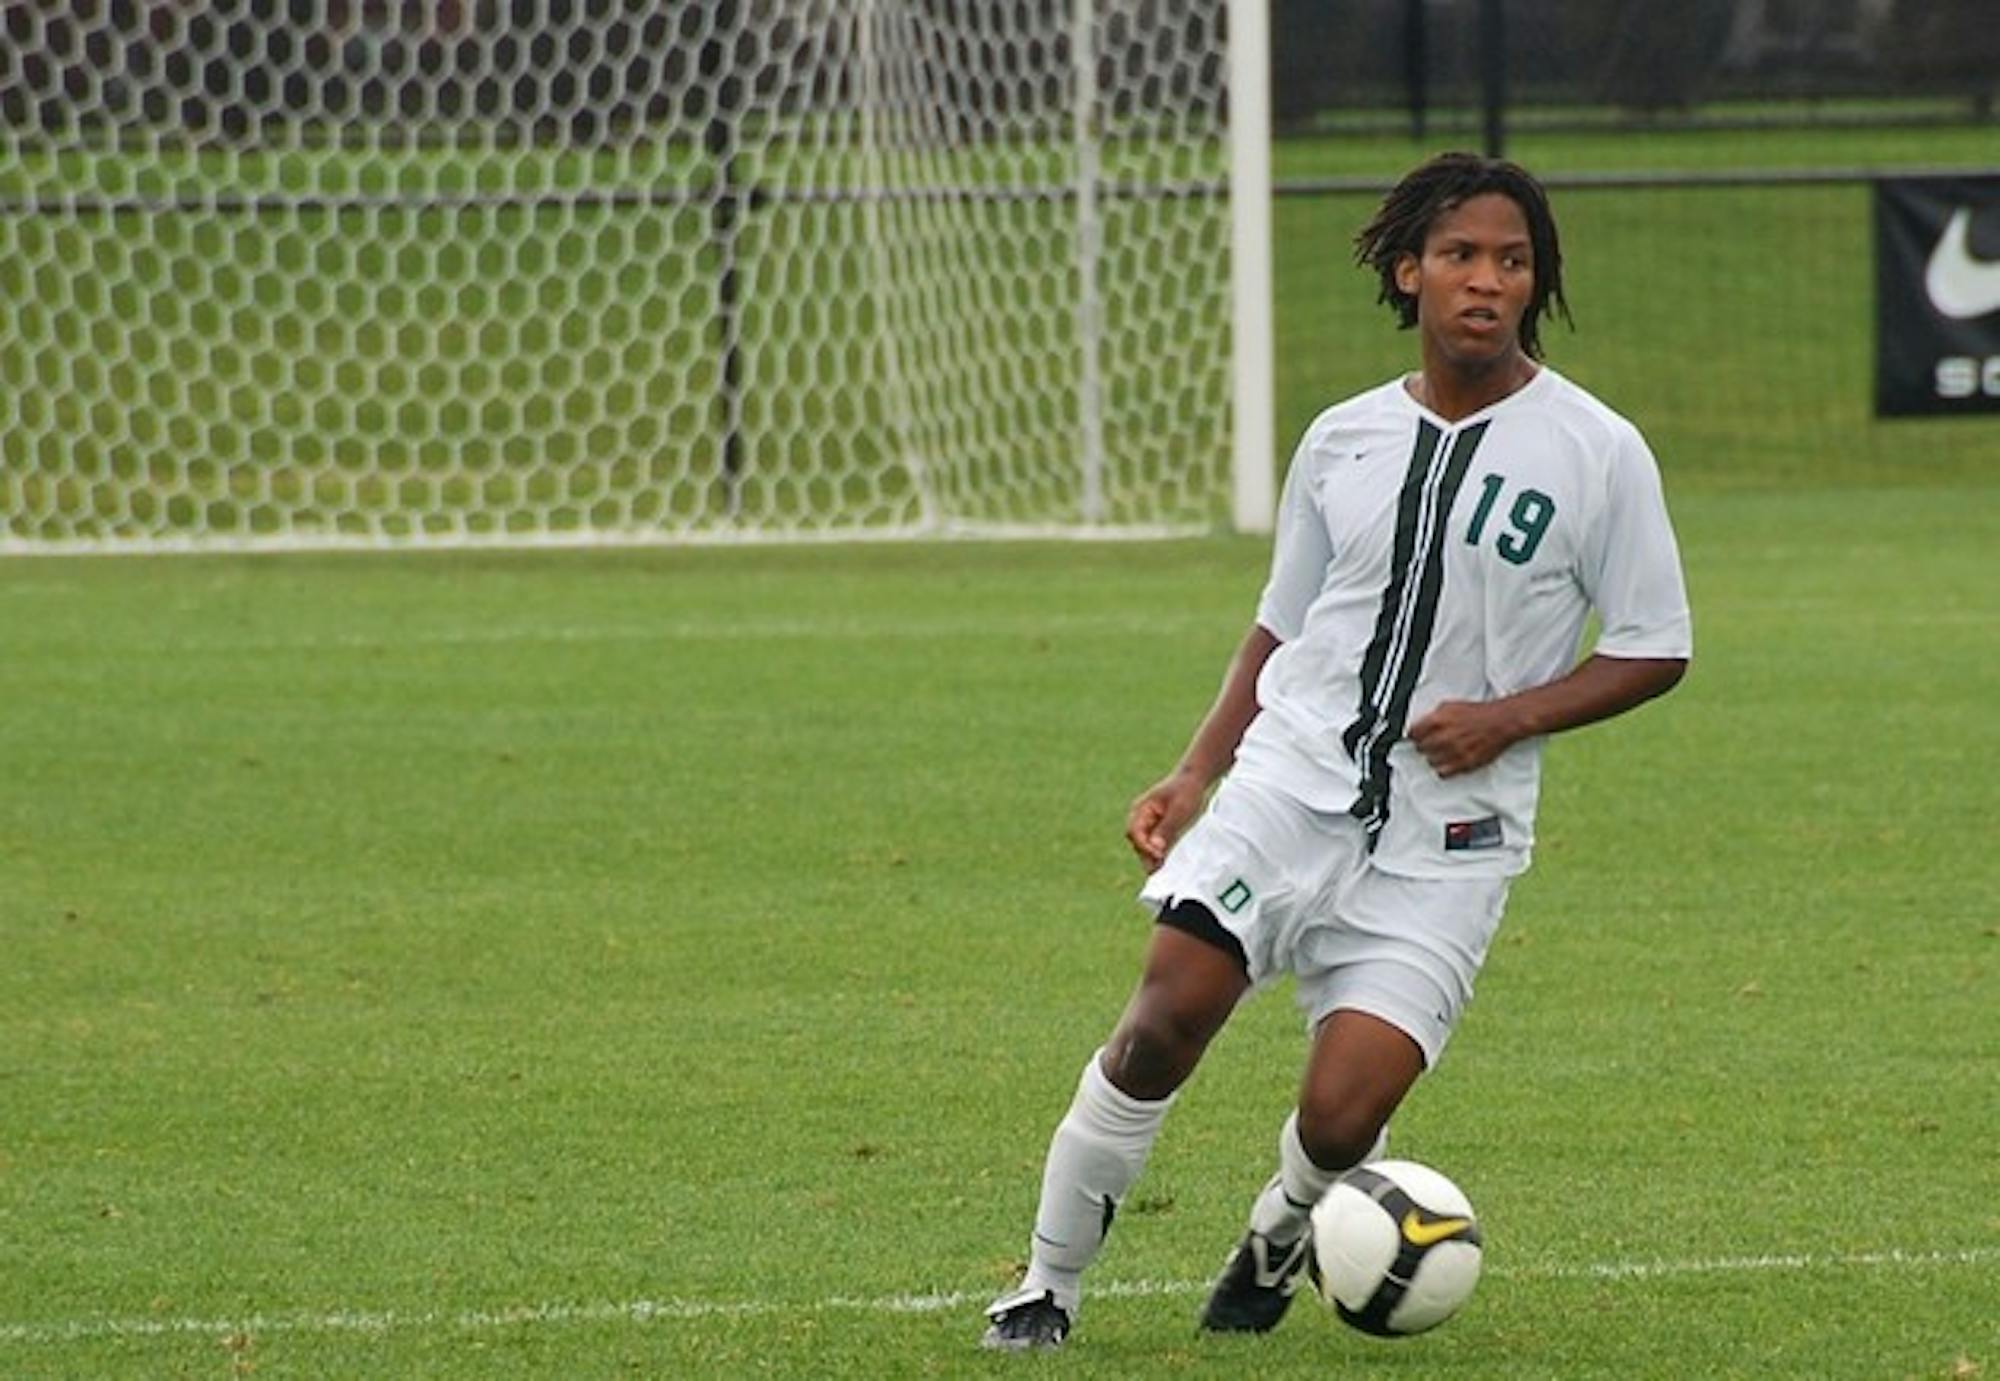 Pumi Maqubela '10 helped lead the defense through 89 scoreless minutes, but New Hampshire scored the game-winning goal with just 13 seconds left.